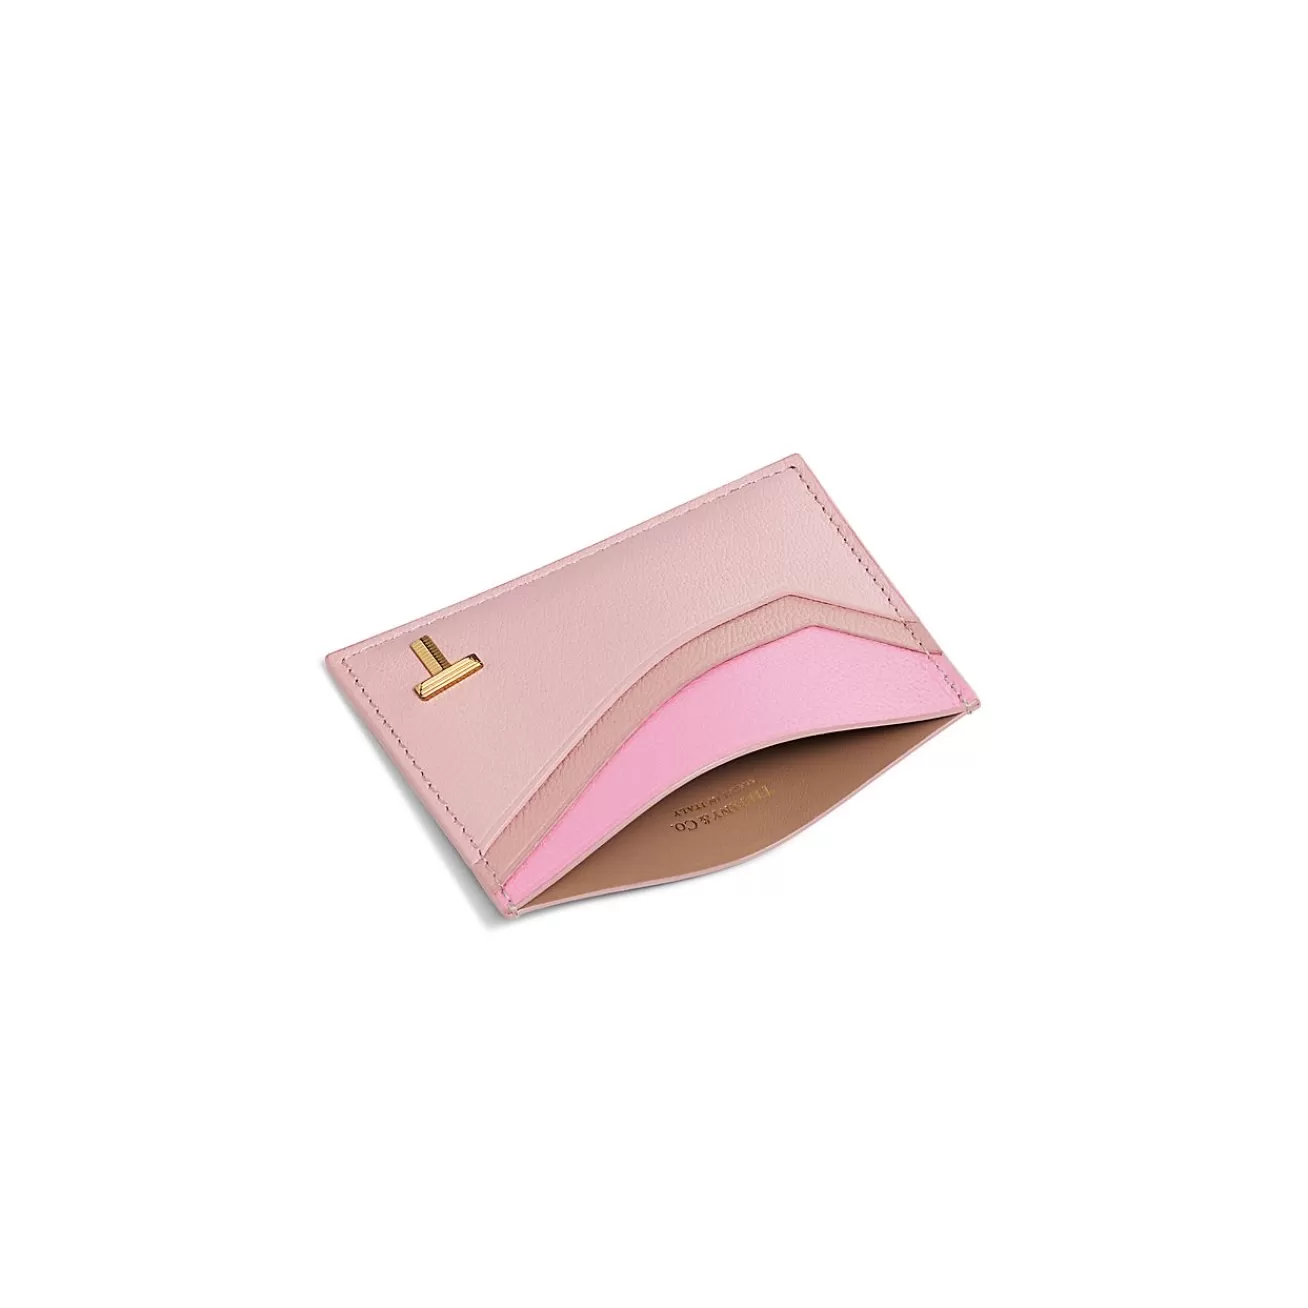 Tiffany & Co. Tiffany T Card Case in Pink Colorblock Leather | ^ Business Gifts | Small Leather Goods